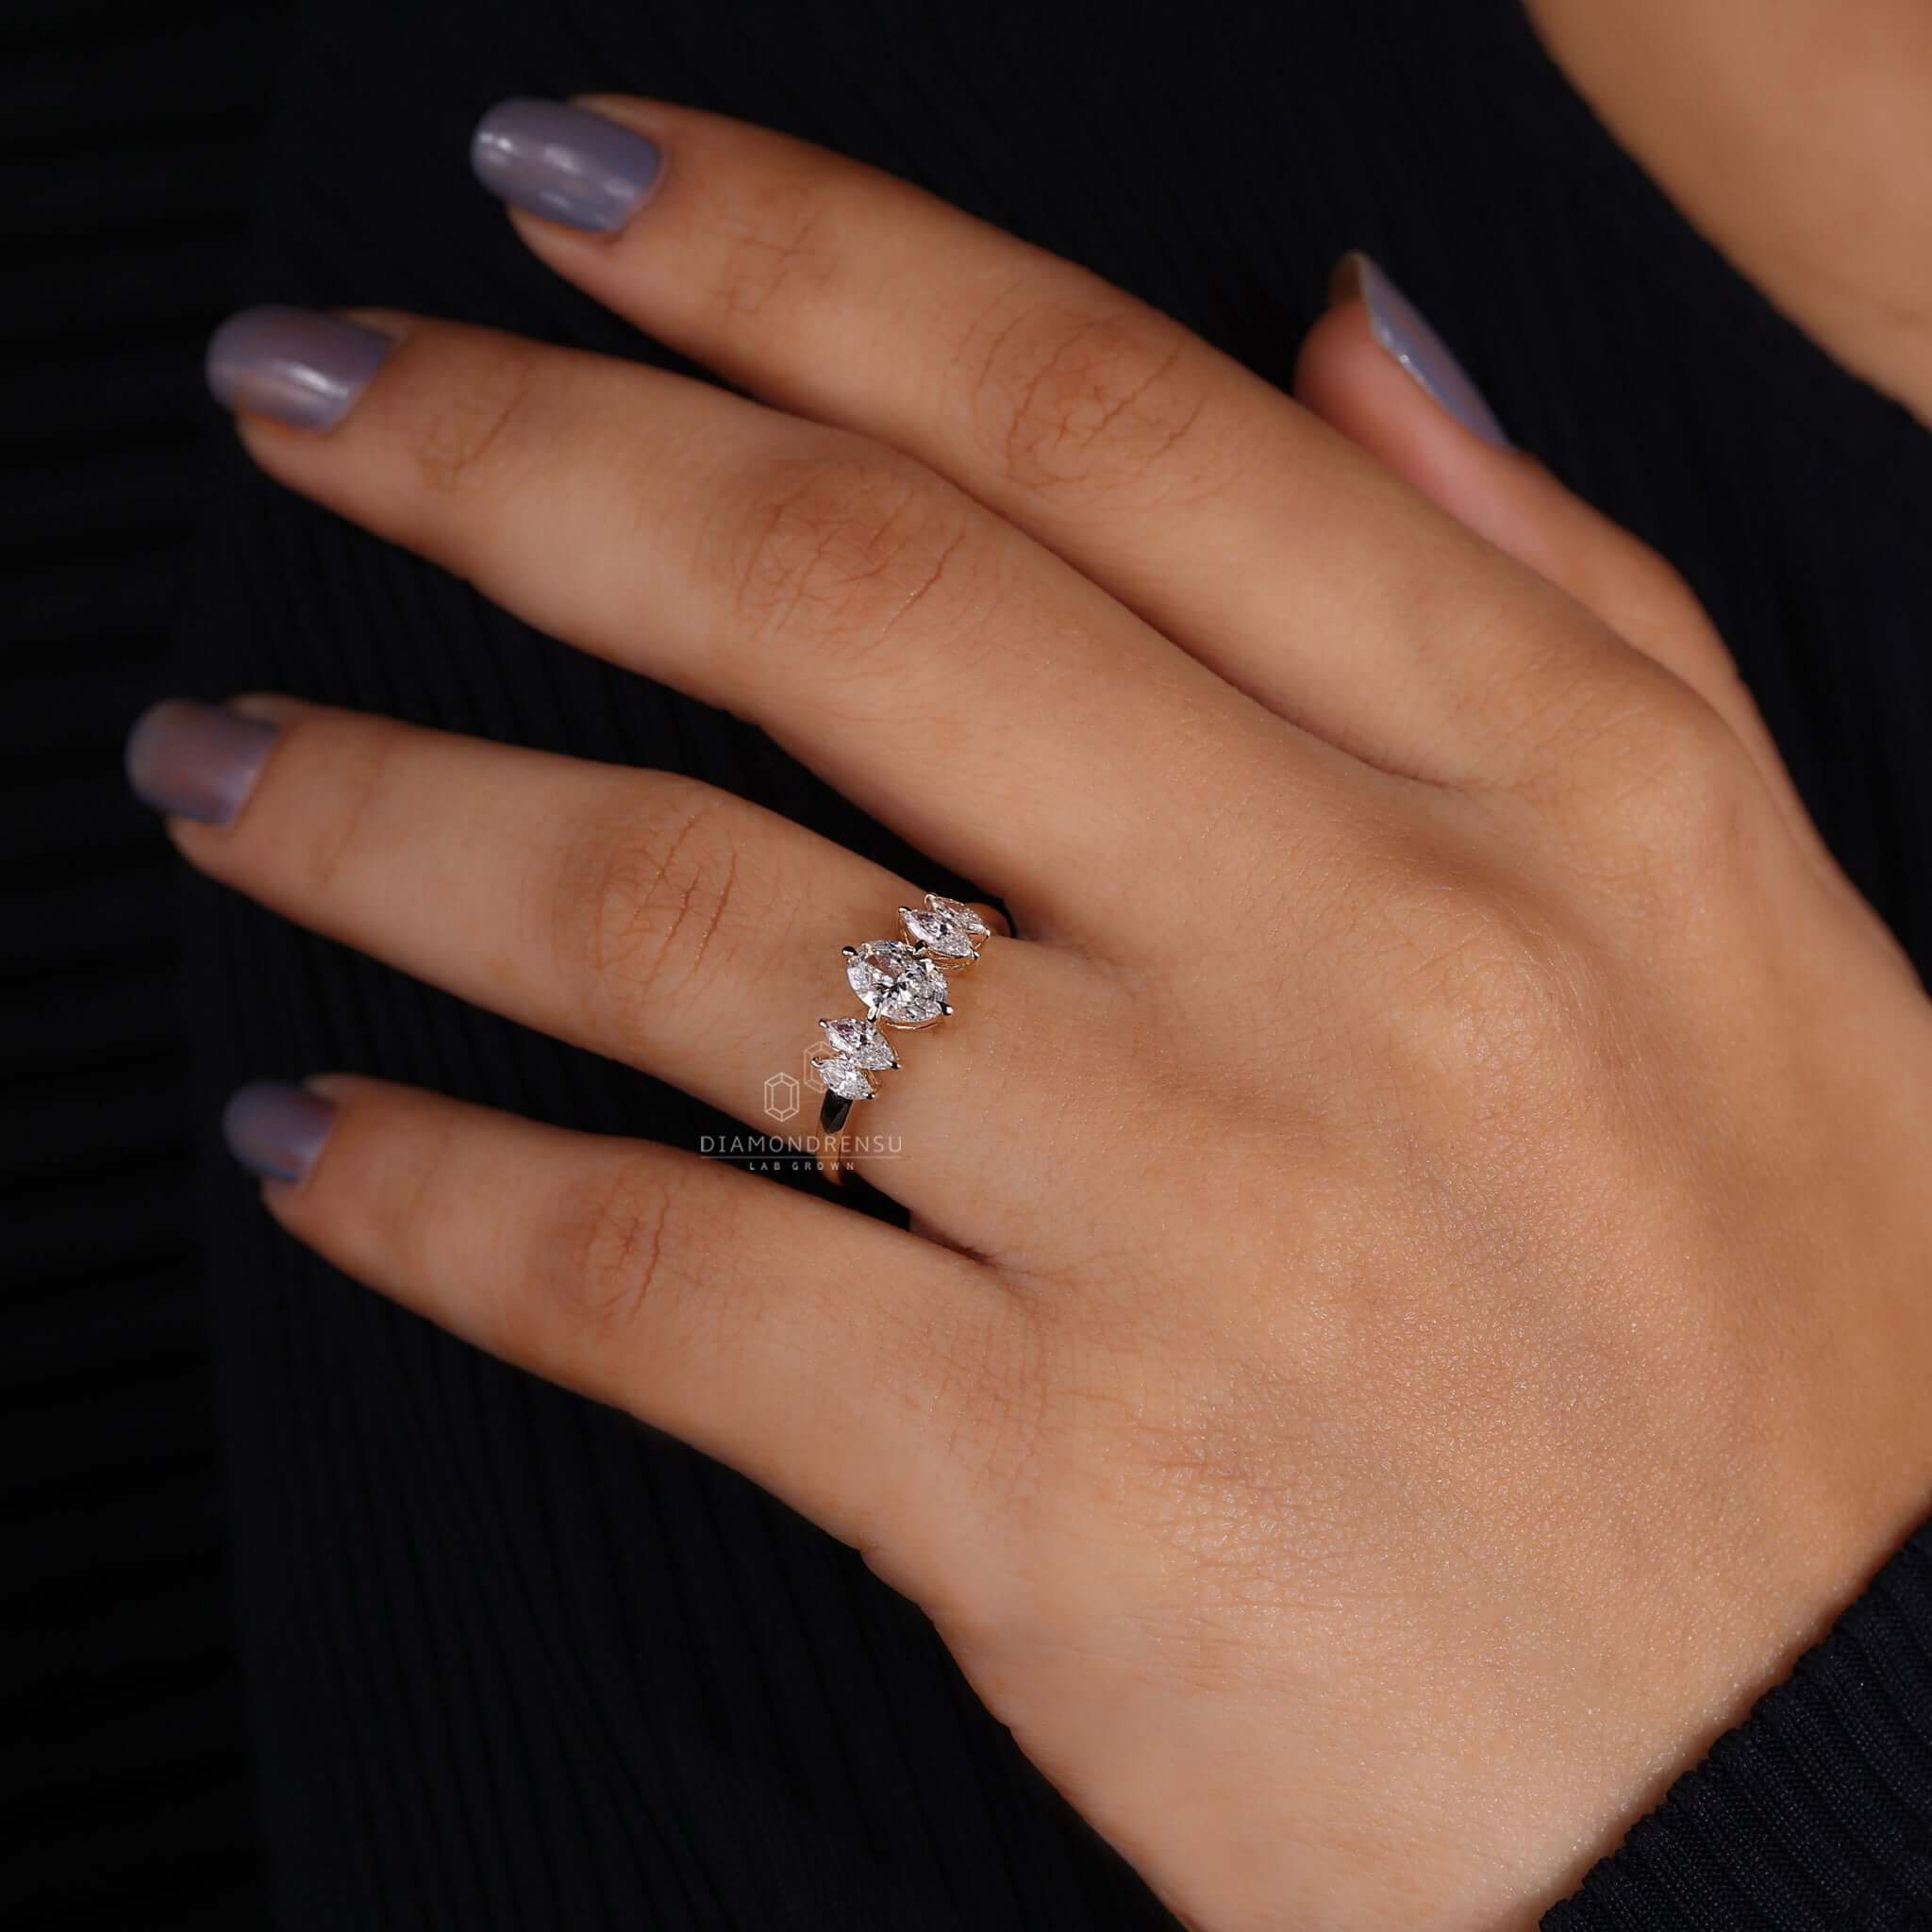 Close-up of a marquise diamond engagement ring on hand, showcasing its distinctive and romantic design